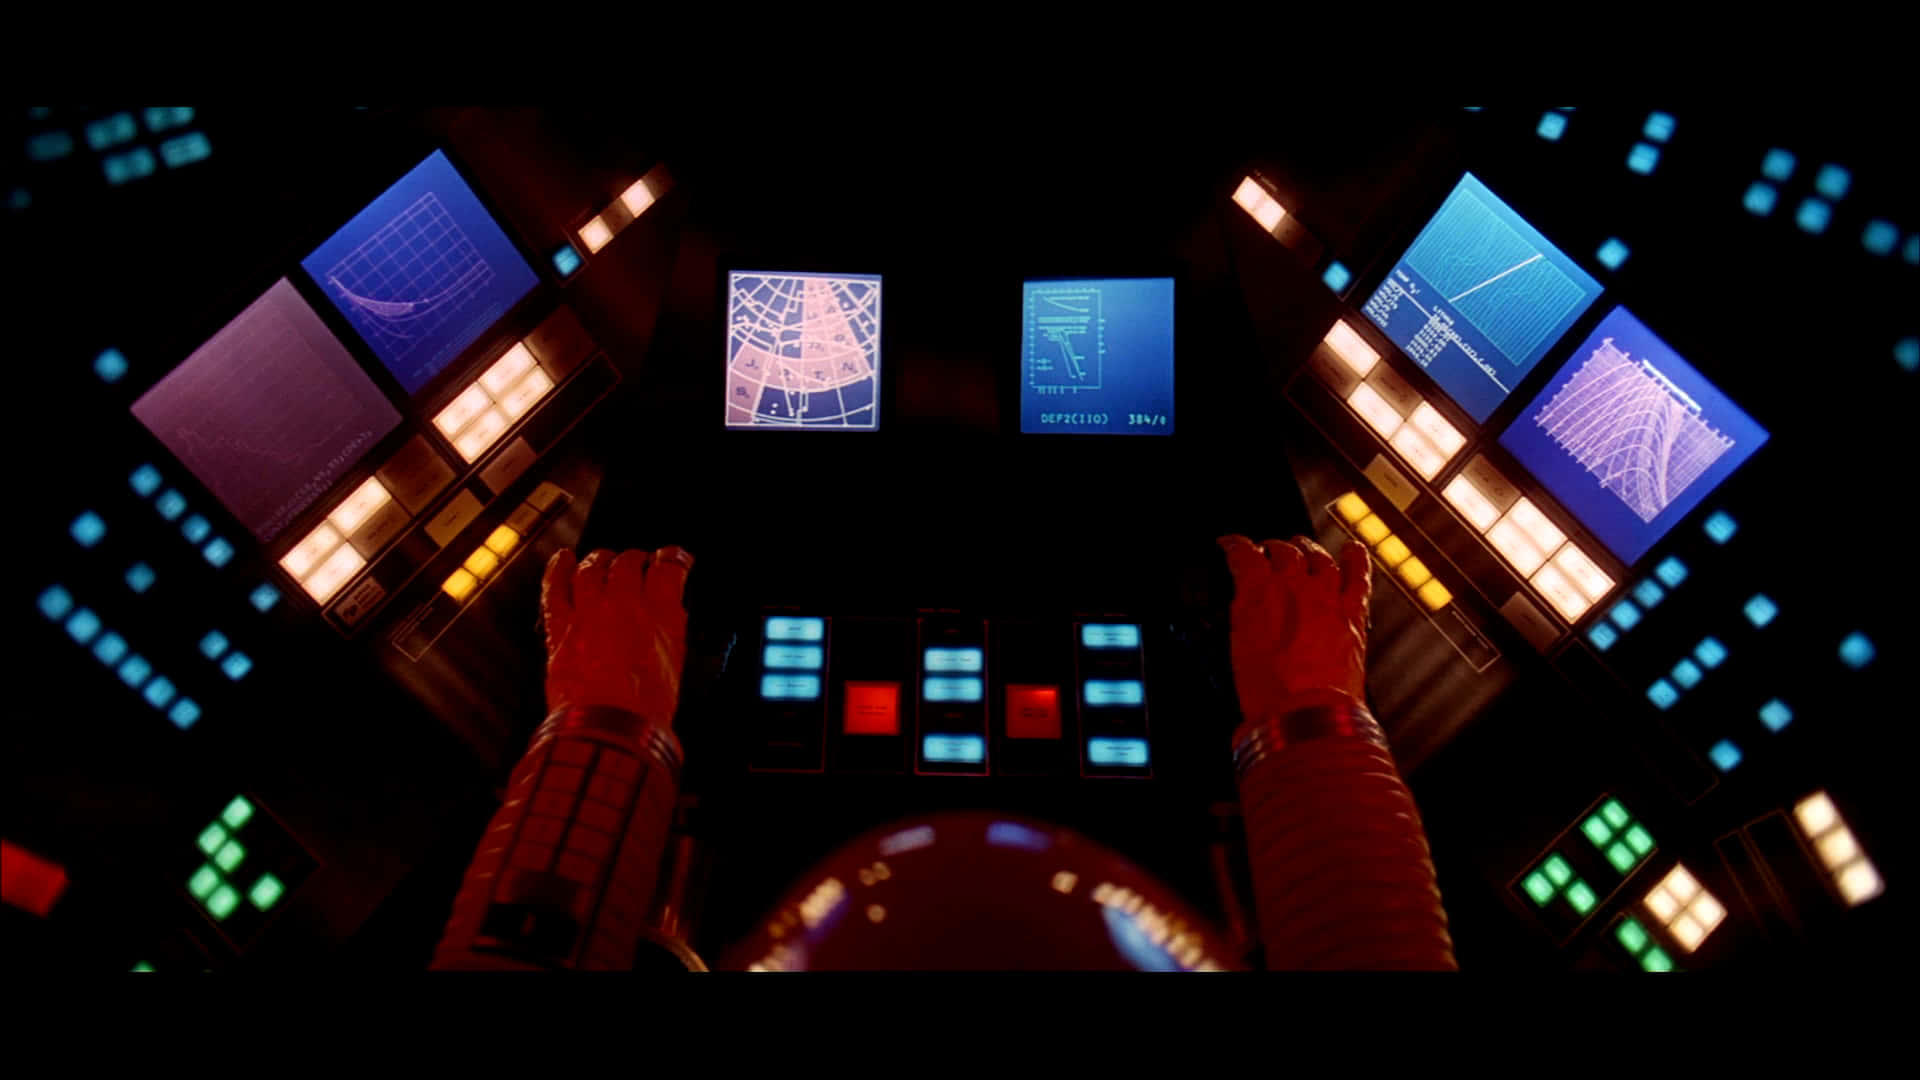 The iconic Space Station V from Stanley Kubrick's 1968 science fiction film, 2001 A Space Odyssey Wallpaper